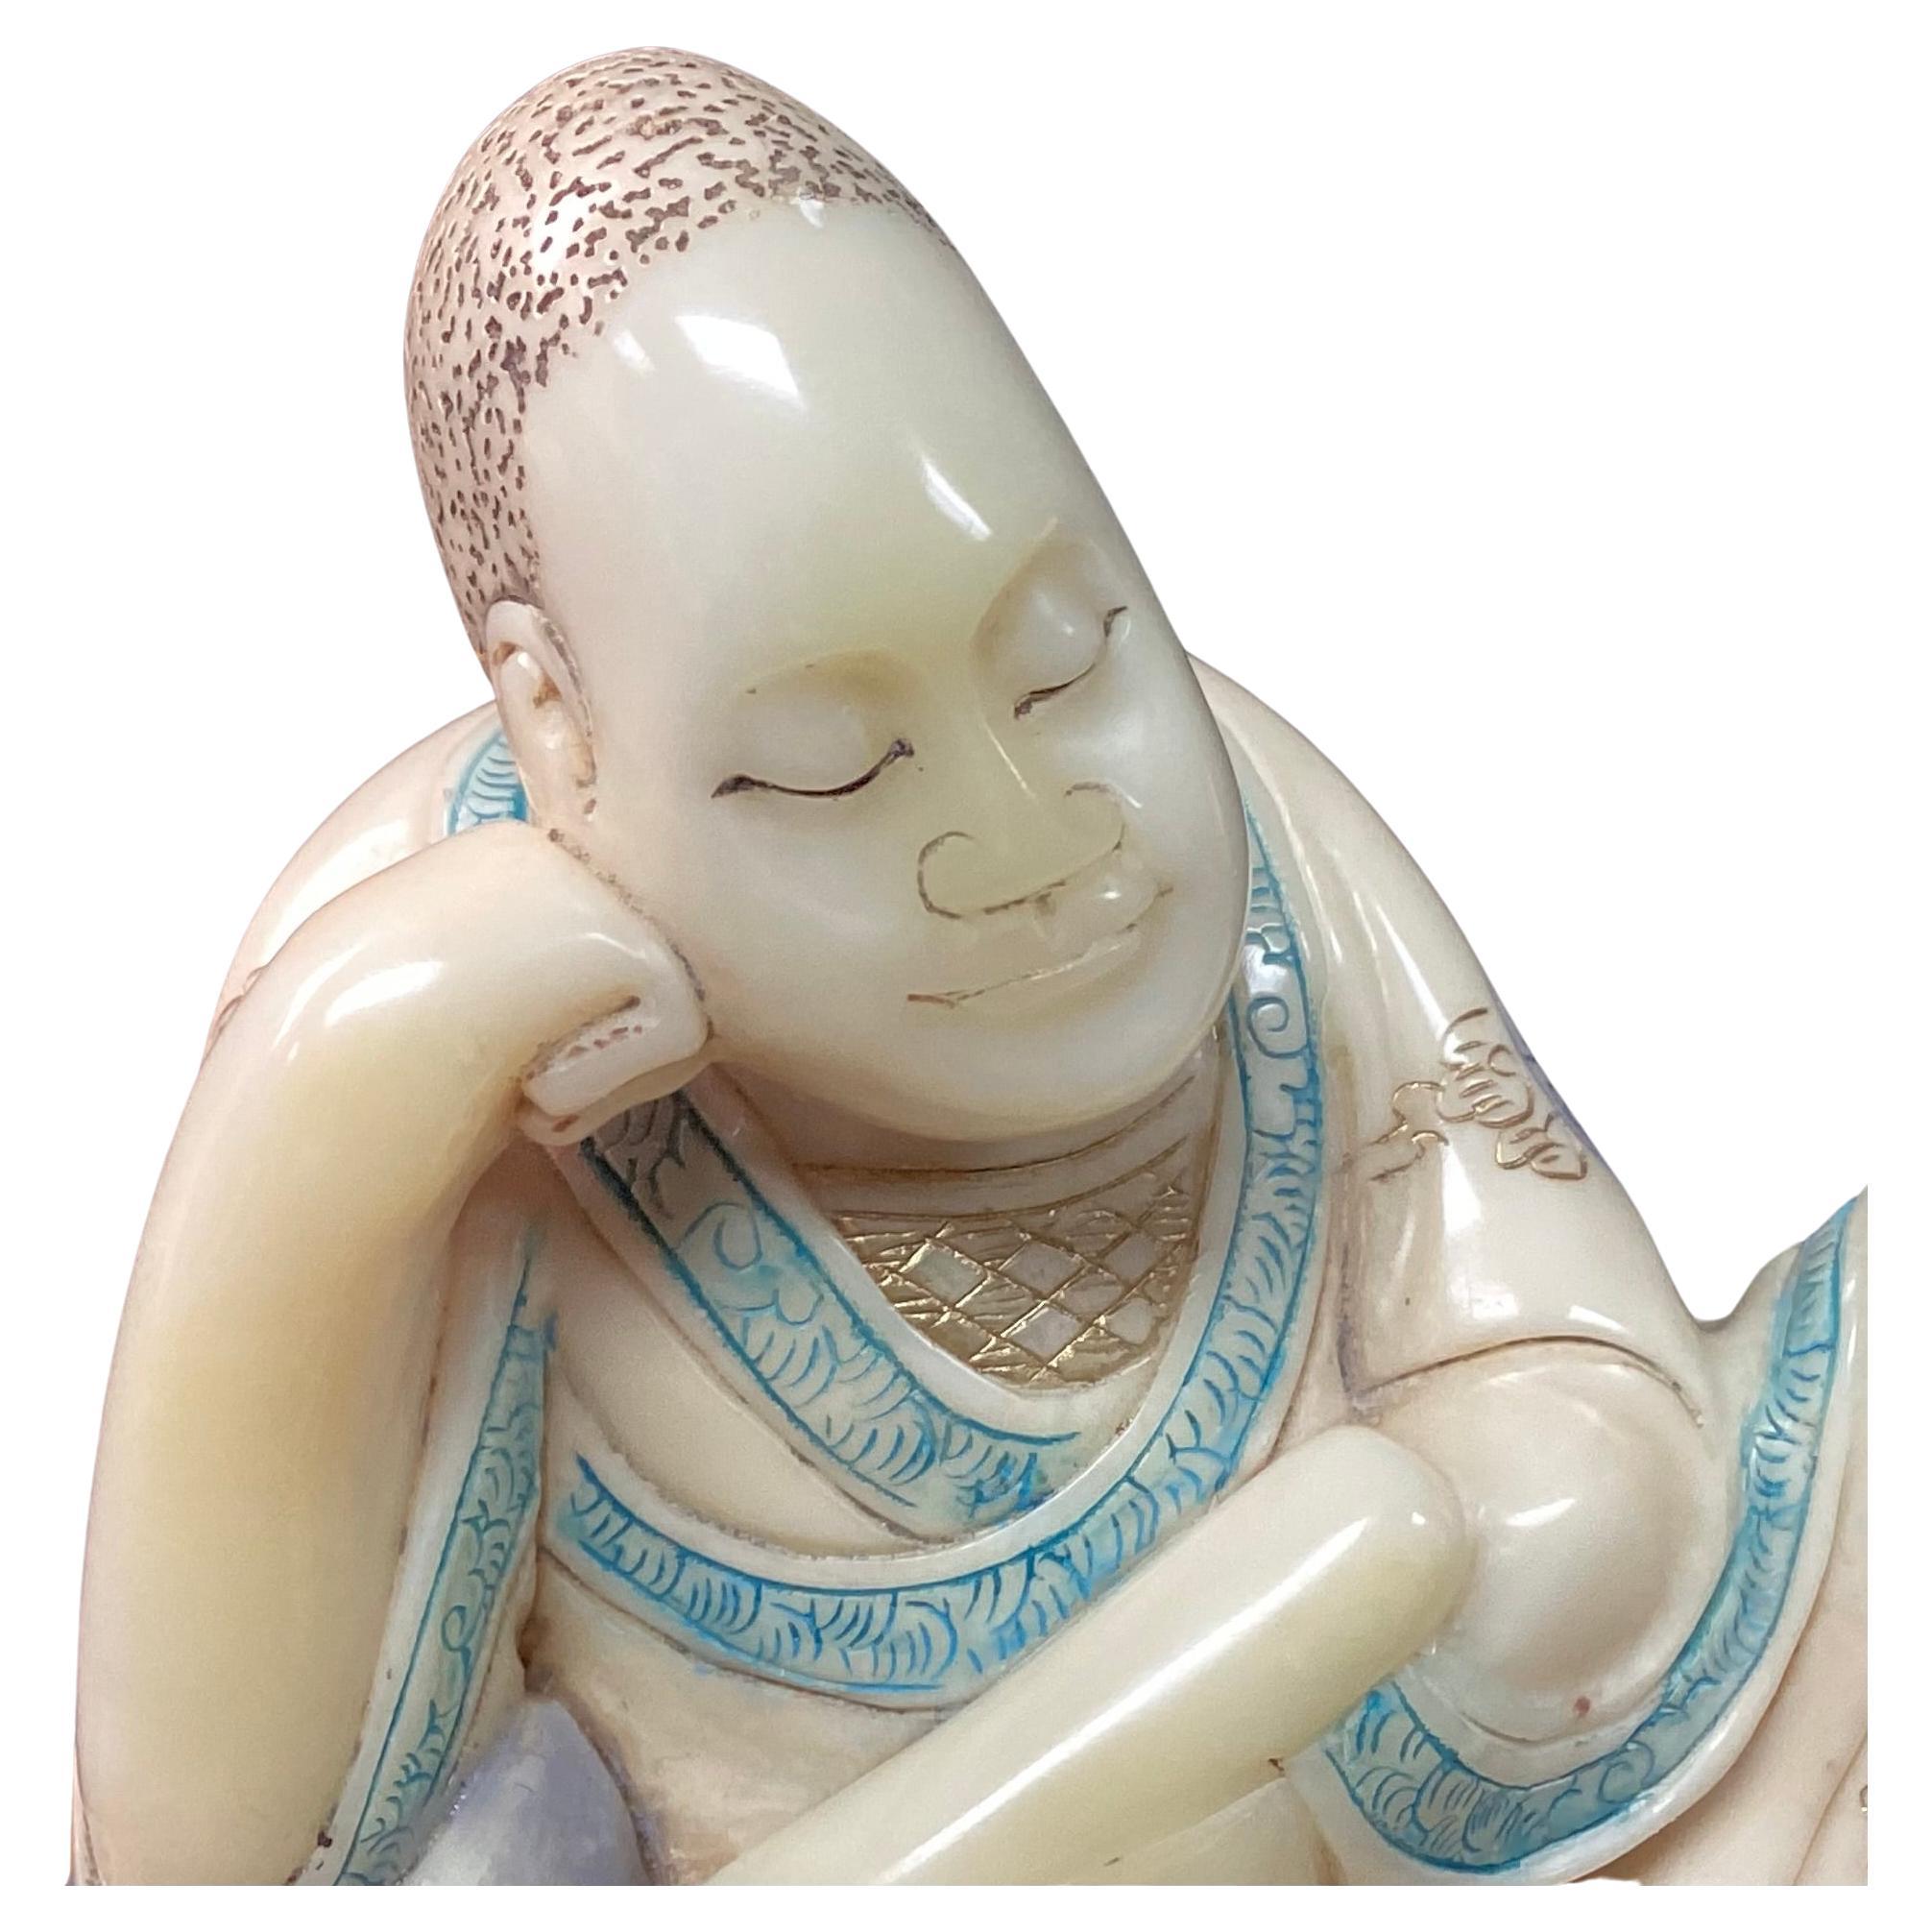 19th century carved Chinese Soapstone Arhat figure in the style of the Qing dynasty. Intricately carved figure is in seated position, hand to face, wearing a robe with aqua and dark blue symbols on cream background.